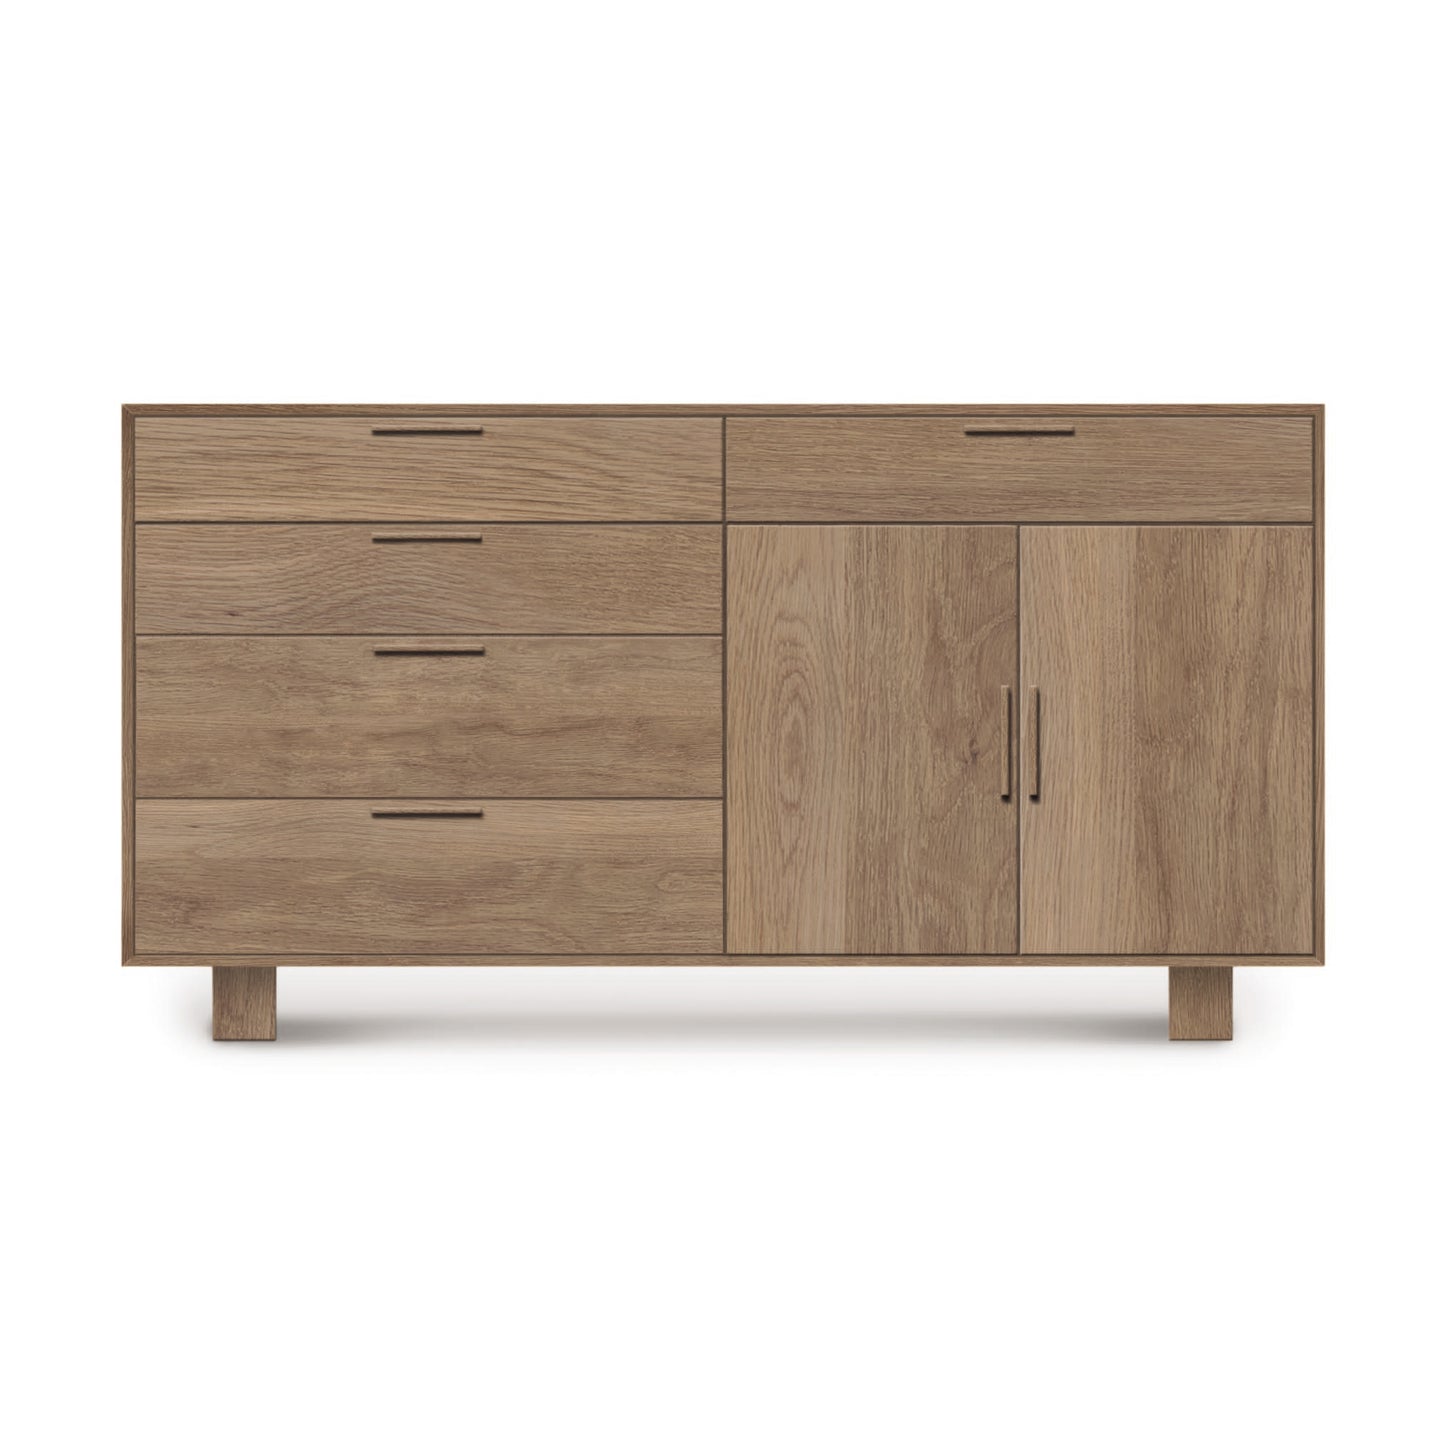 A solid hardwood Iso Oak 2 Door, 5 Drawer Buffet sideboard from Copeland Furniture, with three drawers on the left and two doors on the right, isolated on a white background.